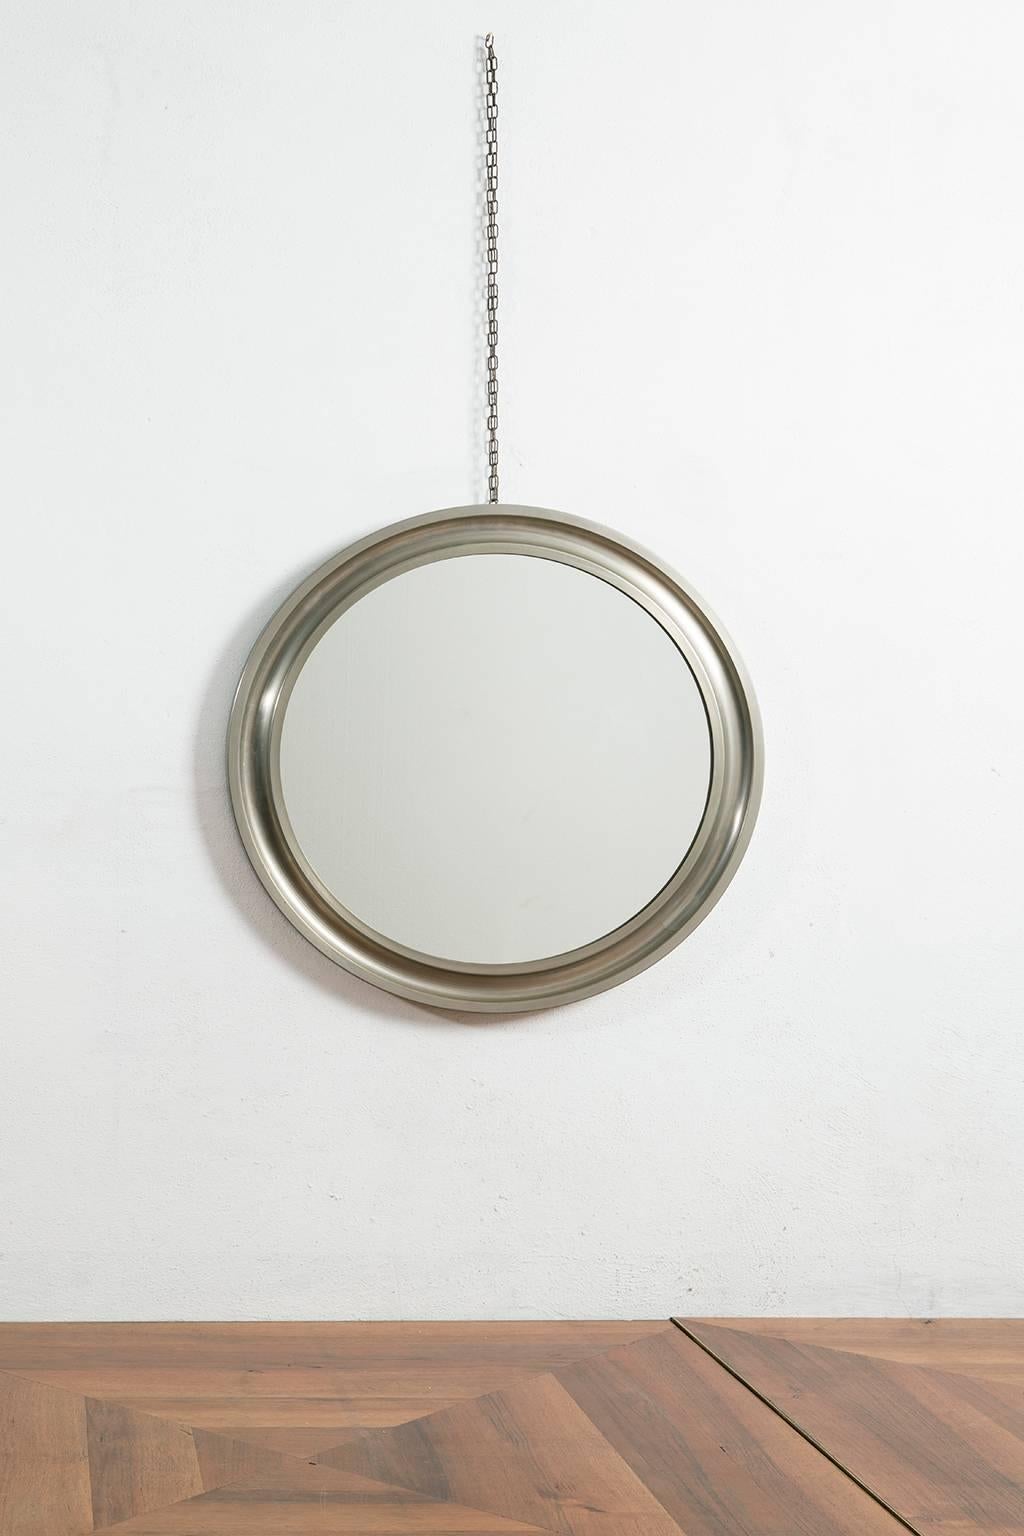 Nickel plated and satinized brass wall round mirror designed by Sergio Mazza for Artemide in 1969. Original patina.
The mirror is hanged by a chain set on metal frame's top side.

Italian designer Sergio Mazza is known for his plastic design and